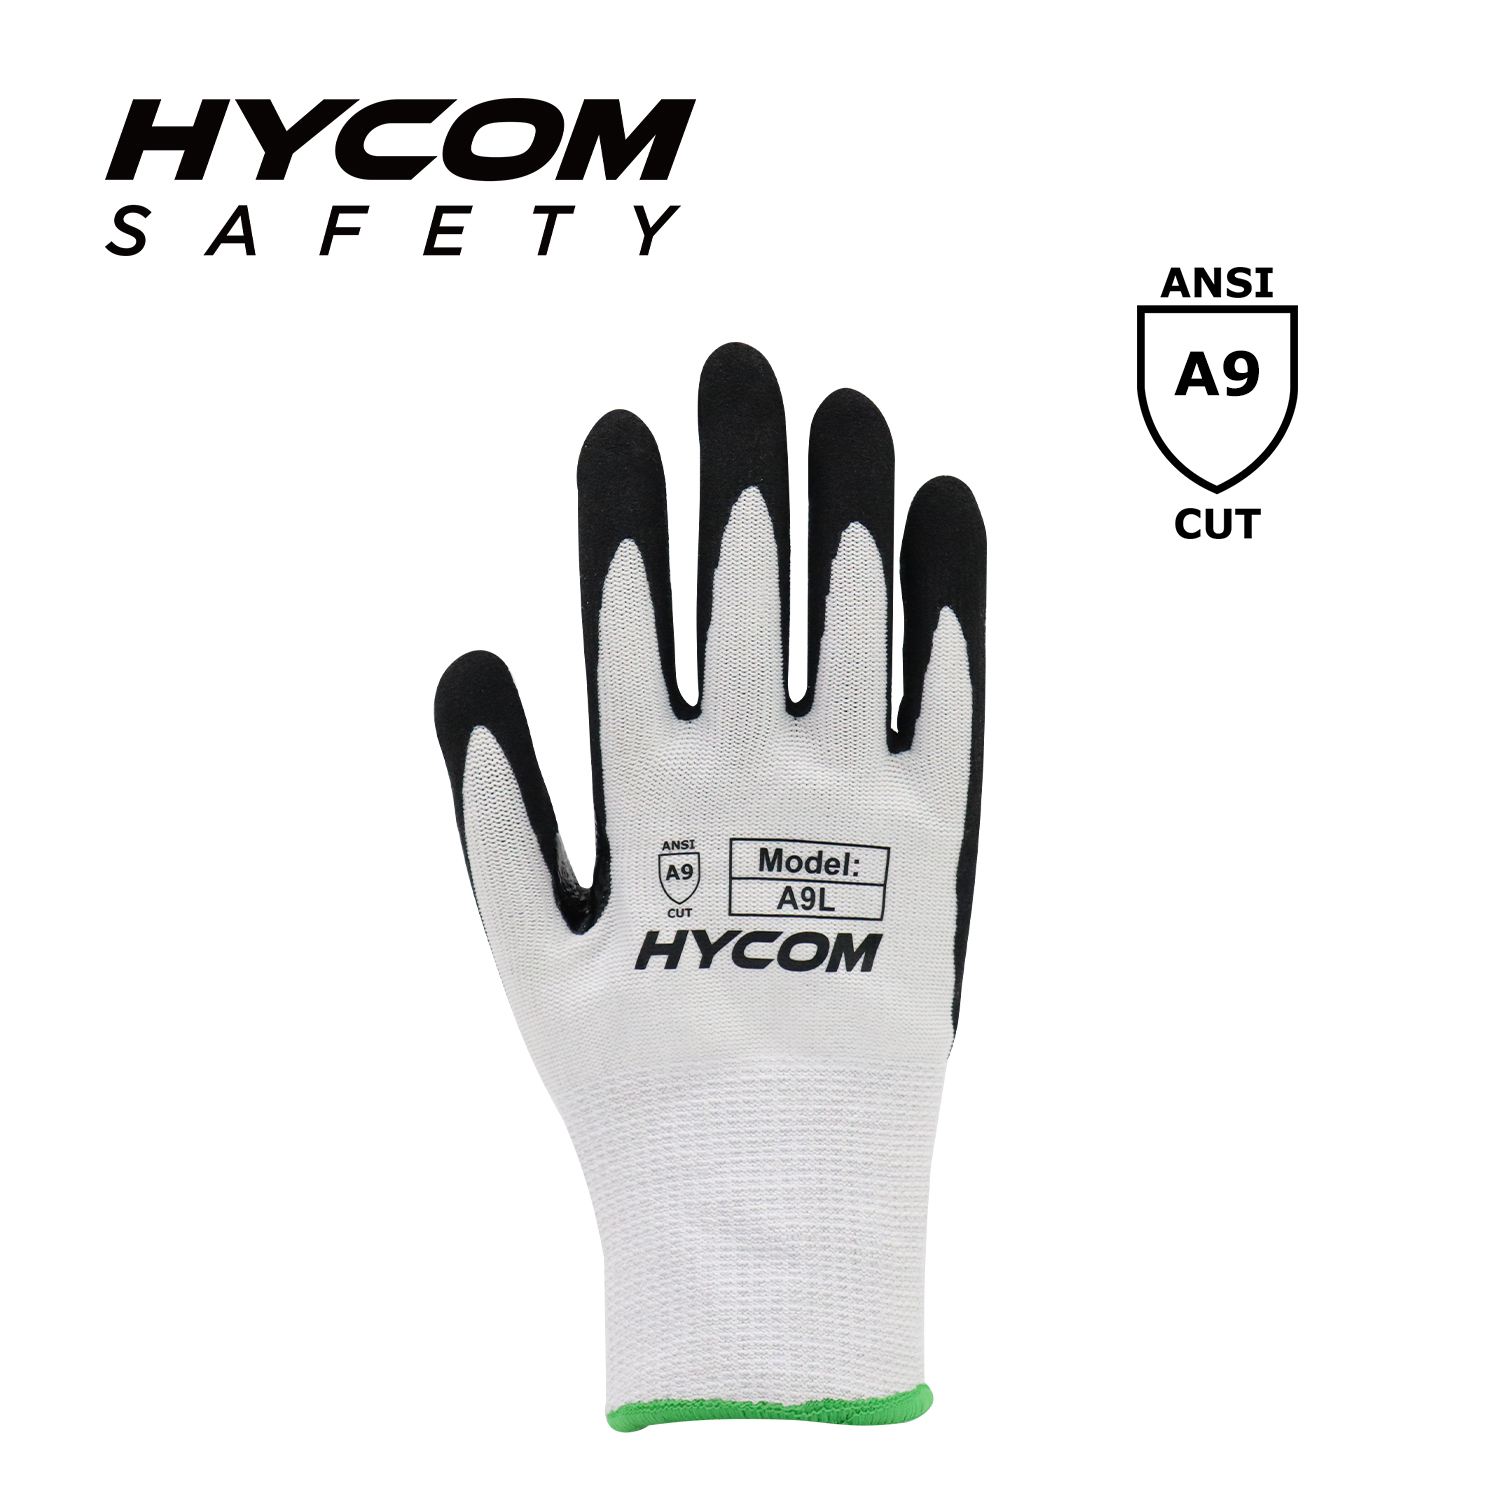 HYCOM 13G ANSI 9 Cut Resistant Glove with Palm Nitrile Coating PPE Gloves